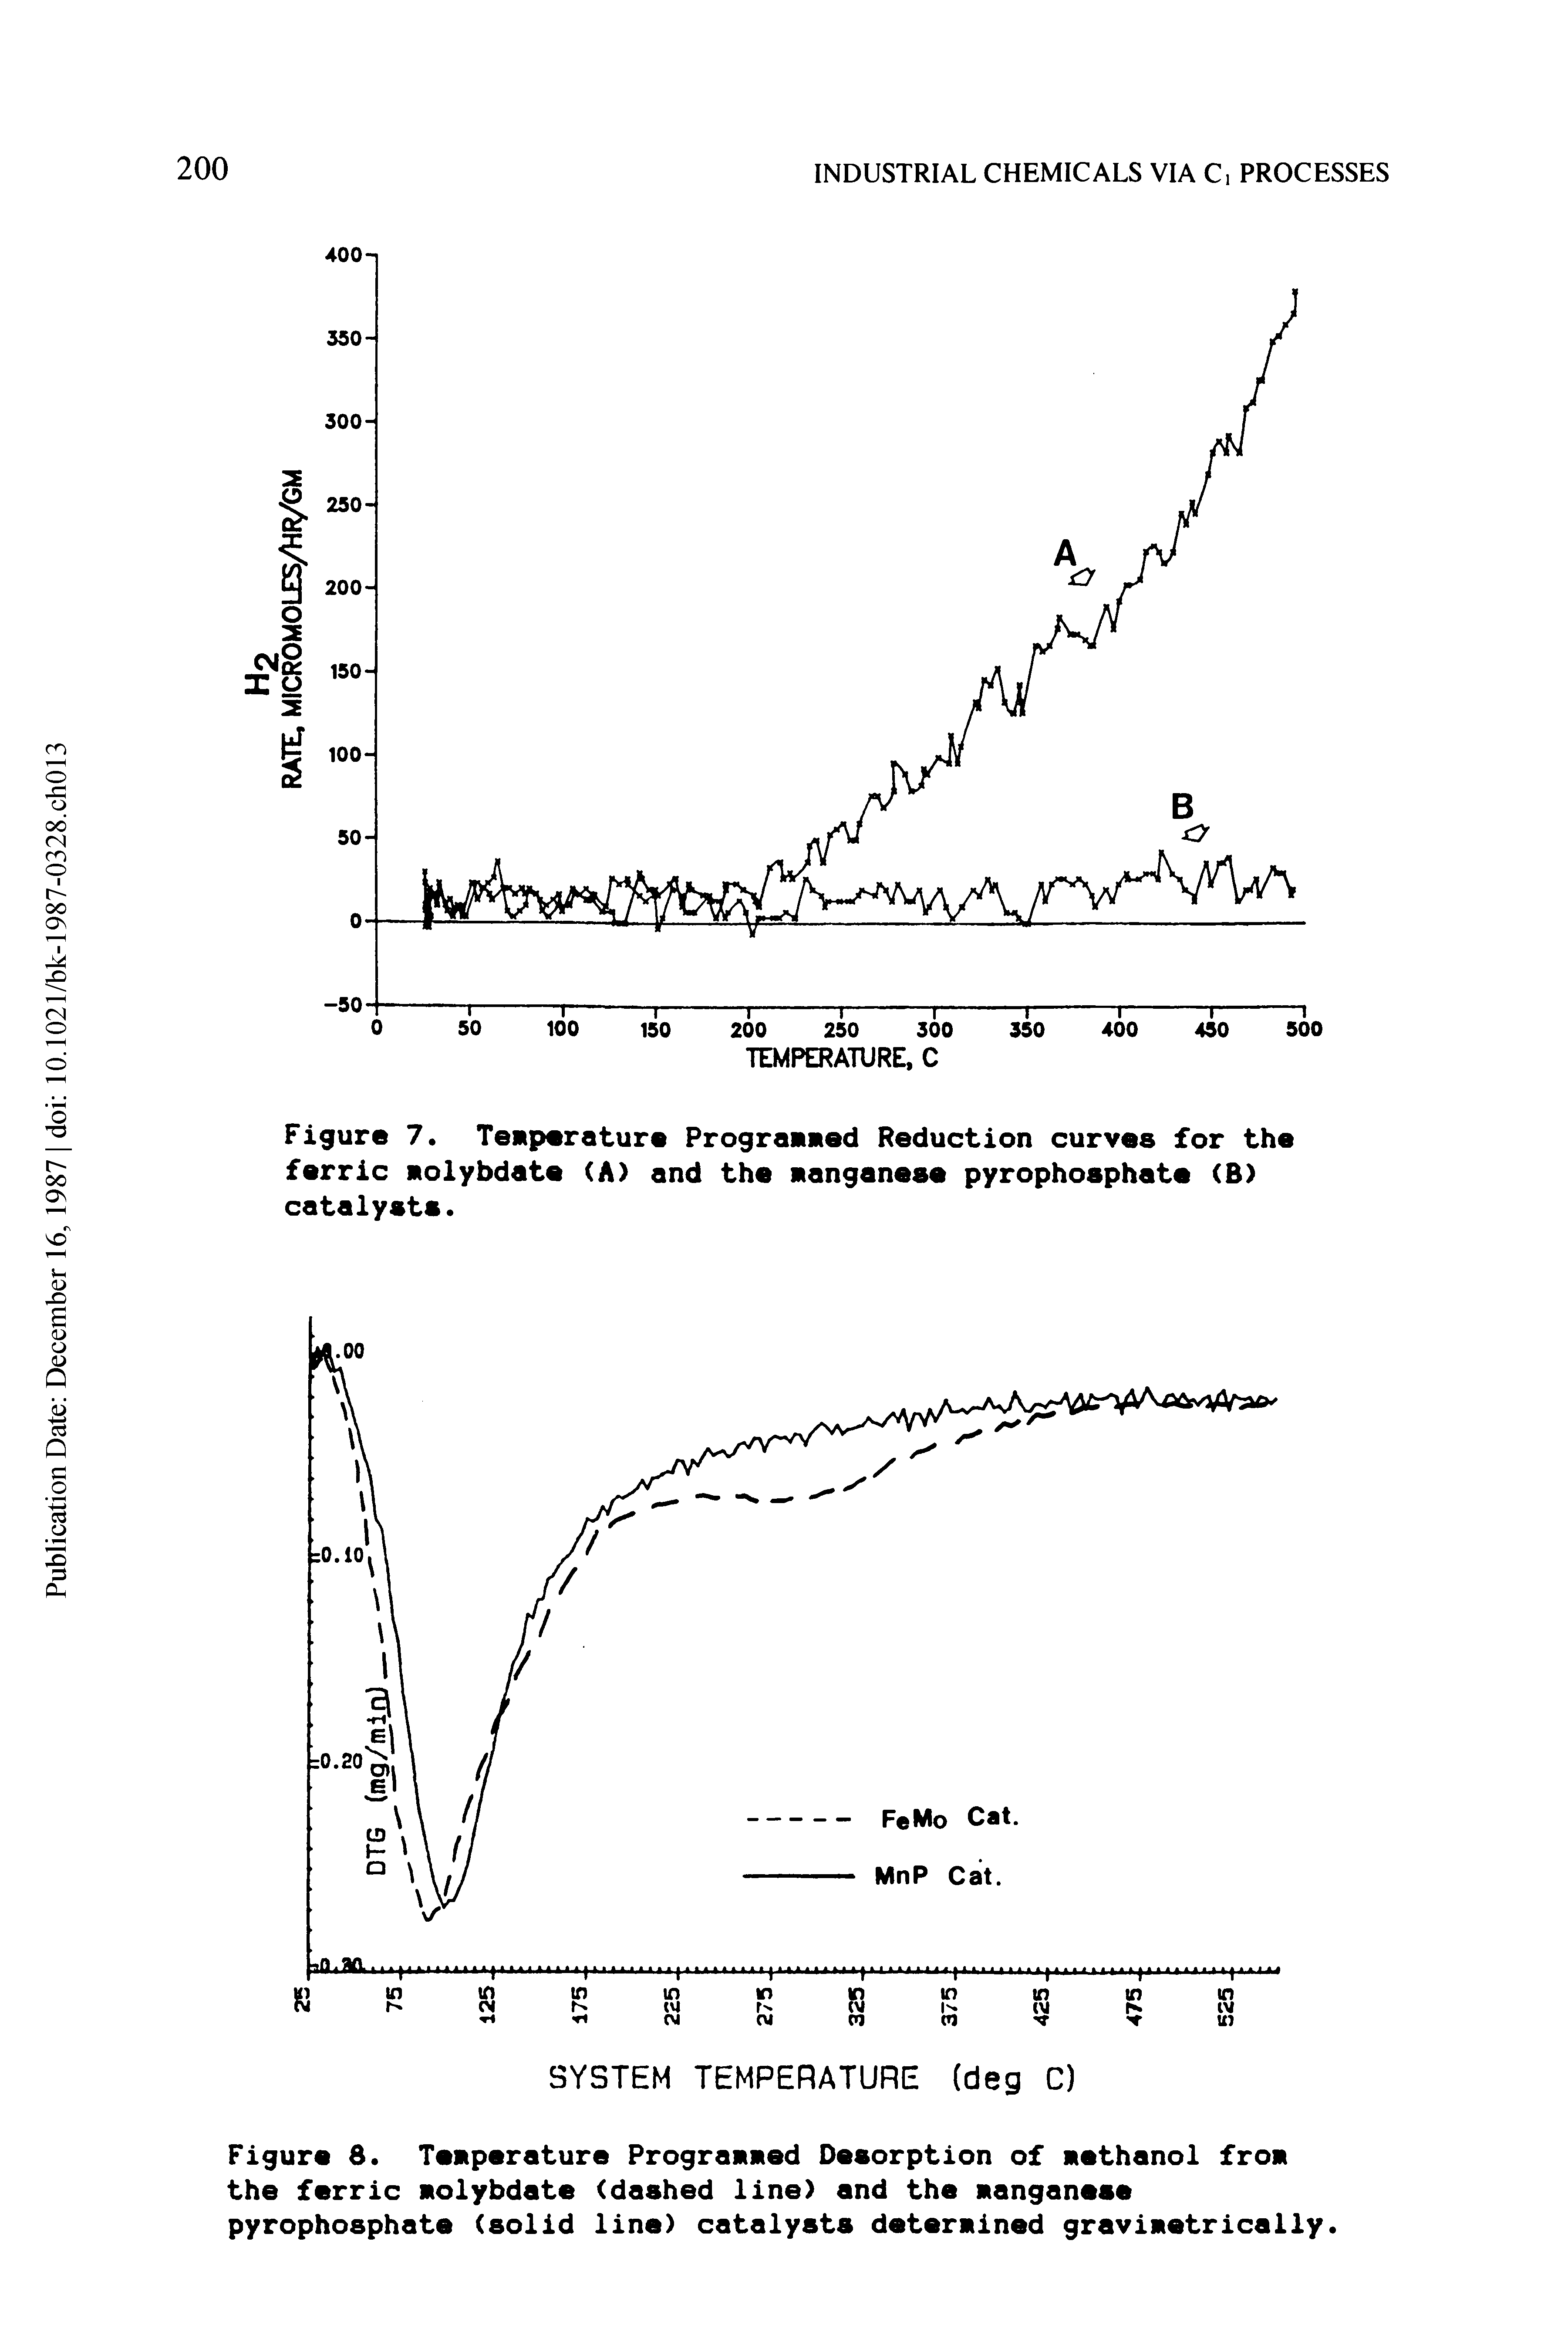 Figure 8. Temperature Programmed Desorption of methanol from the ferric molybdate (dashed line) and the manganese pyrophosphate (solid line) catalysts determined gravimetrically.